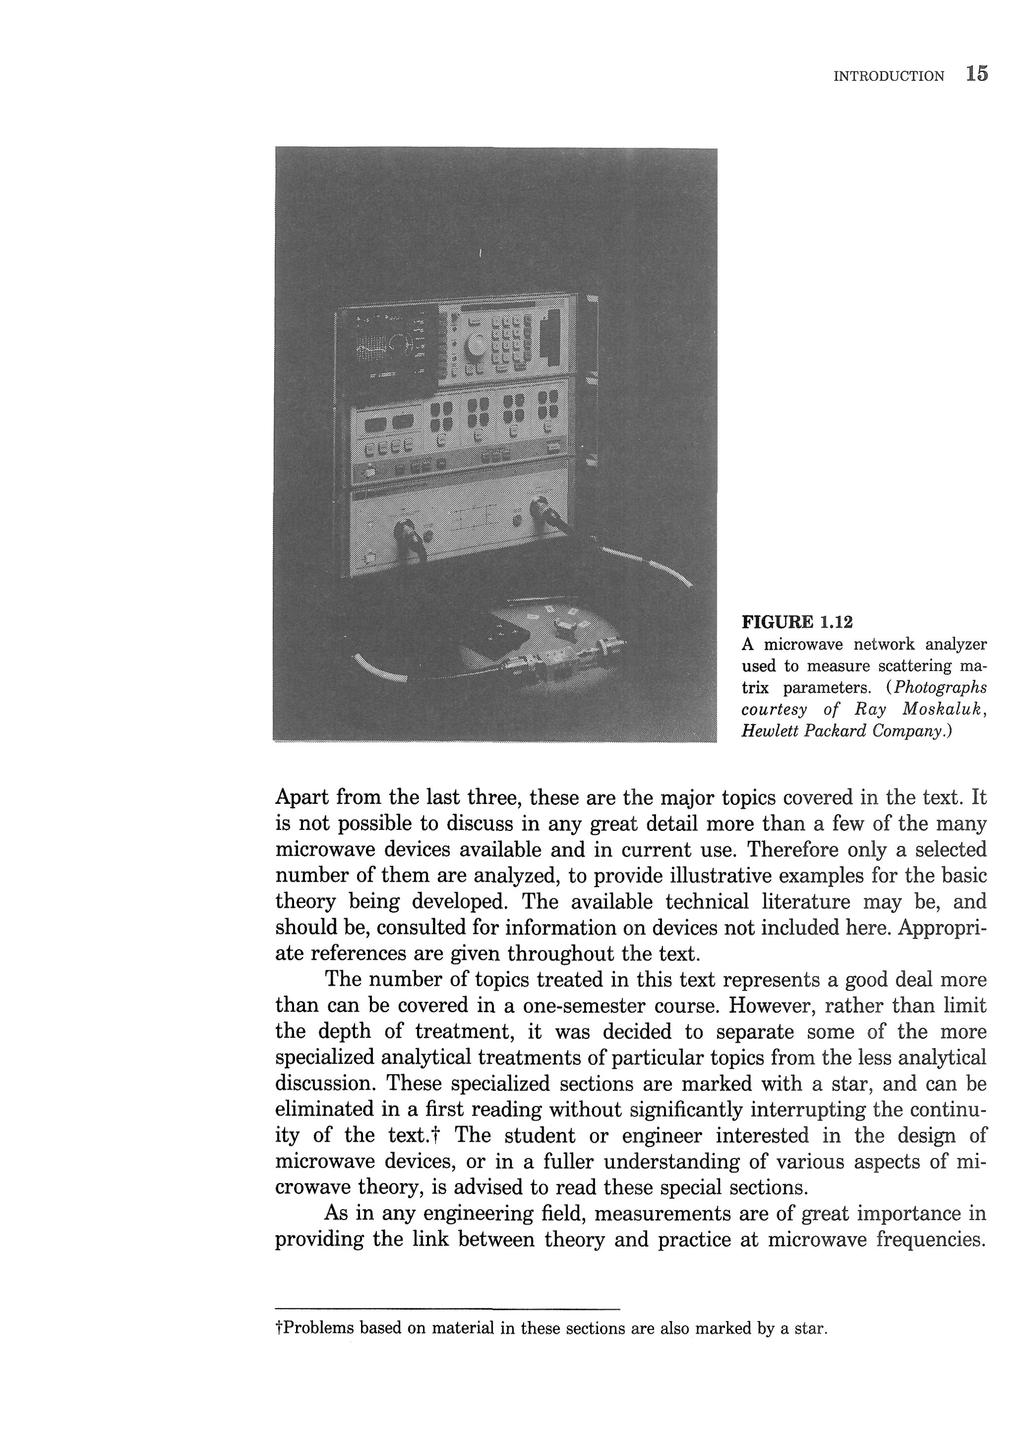 INTRODUCTION 15 FIGURE 1.12 A microwave network analyzer used to measure scattering matrix parameters. (Photographs courtesy of Ray Moskaluk, Hewlett Packard Company.